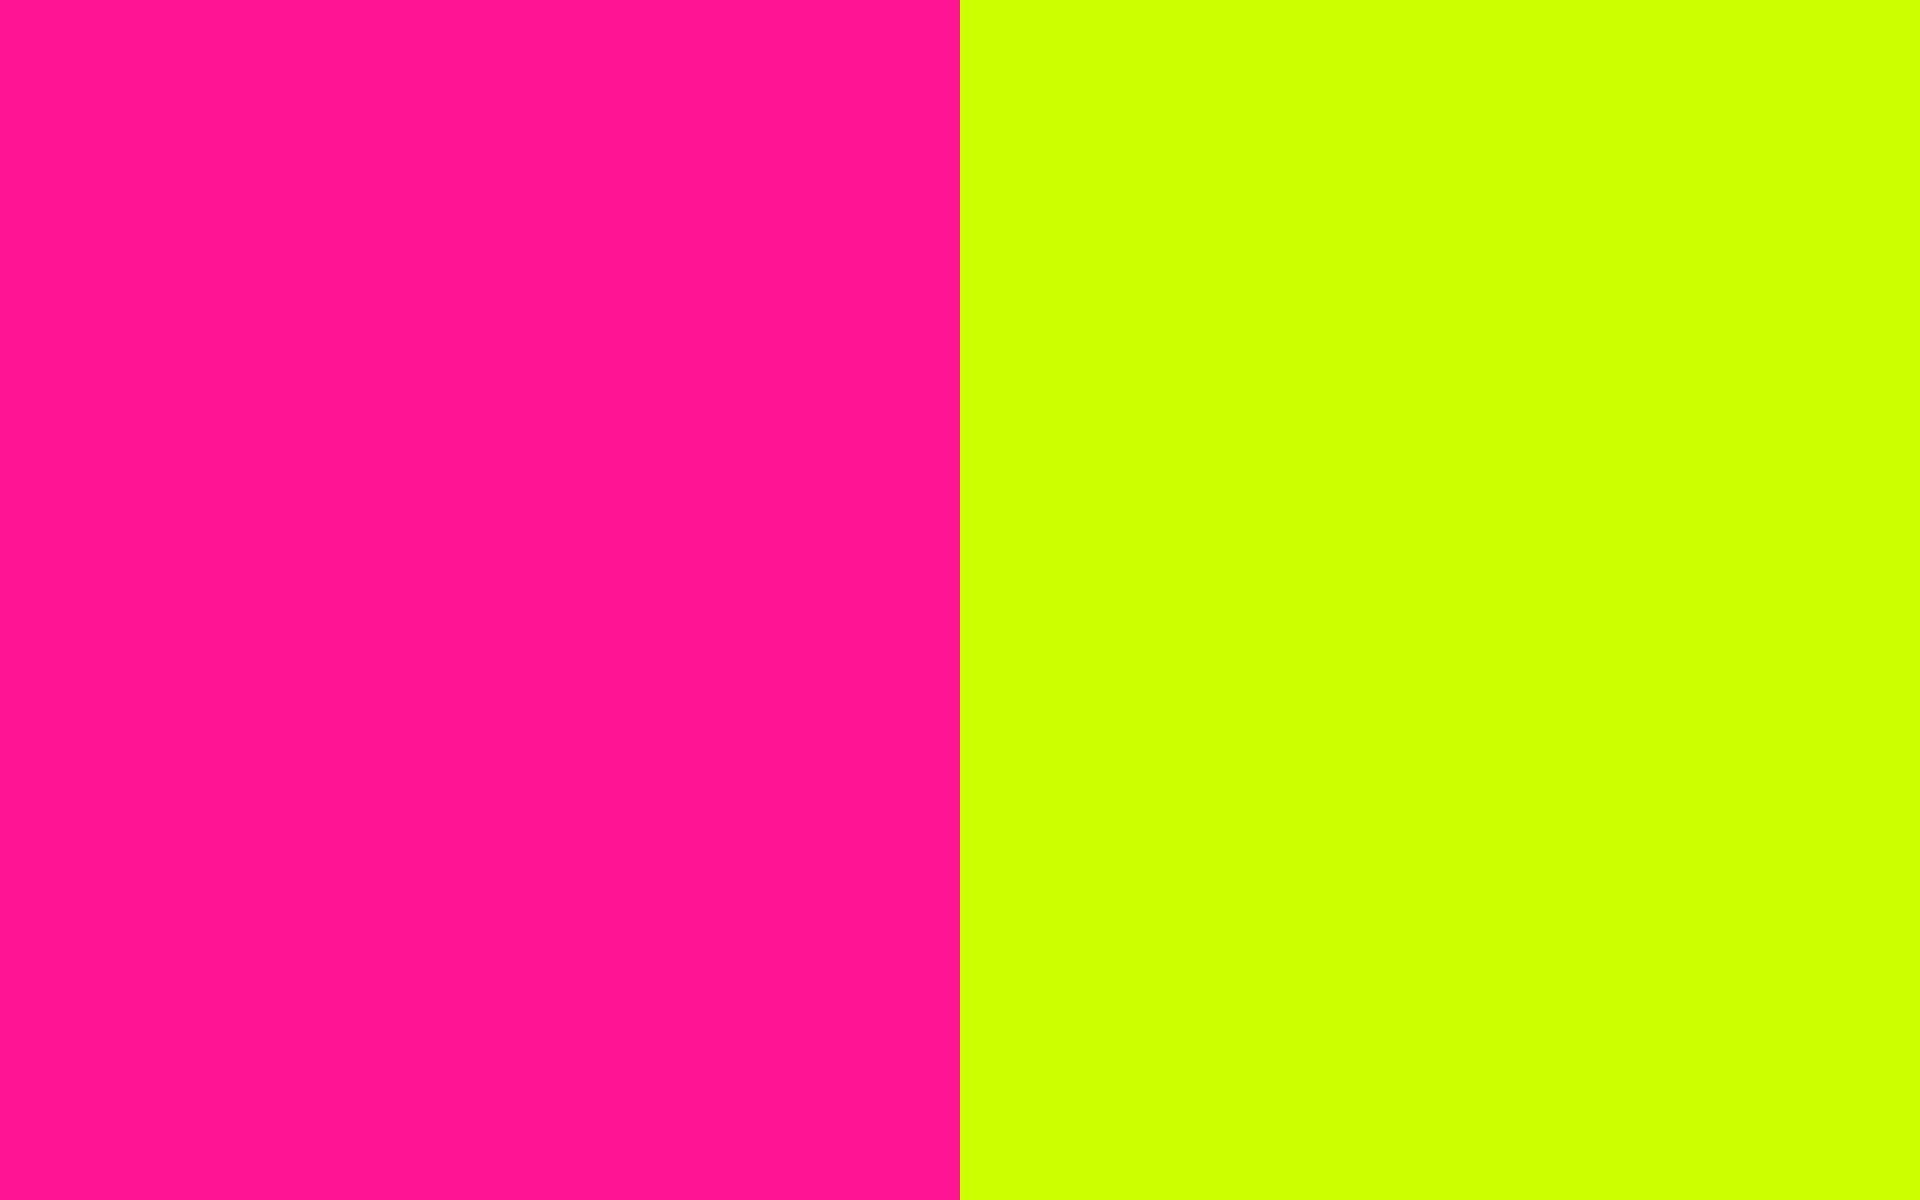 1920x1200 Fluorescent Pink Fluorescent Yellow Two Color Effy Moom Free Coloring Picture wallpaper give a chance to color on the wall without getting in trouble! Fill the walls of your home or office with stress-relieving [effymoom.blogspot.com]